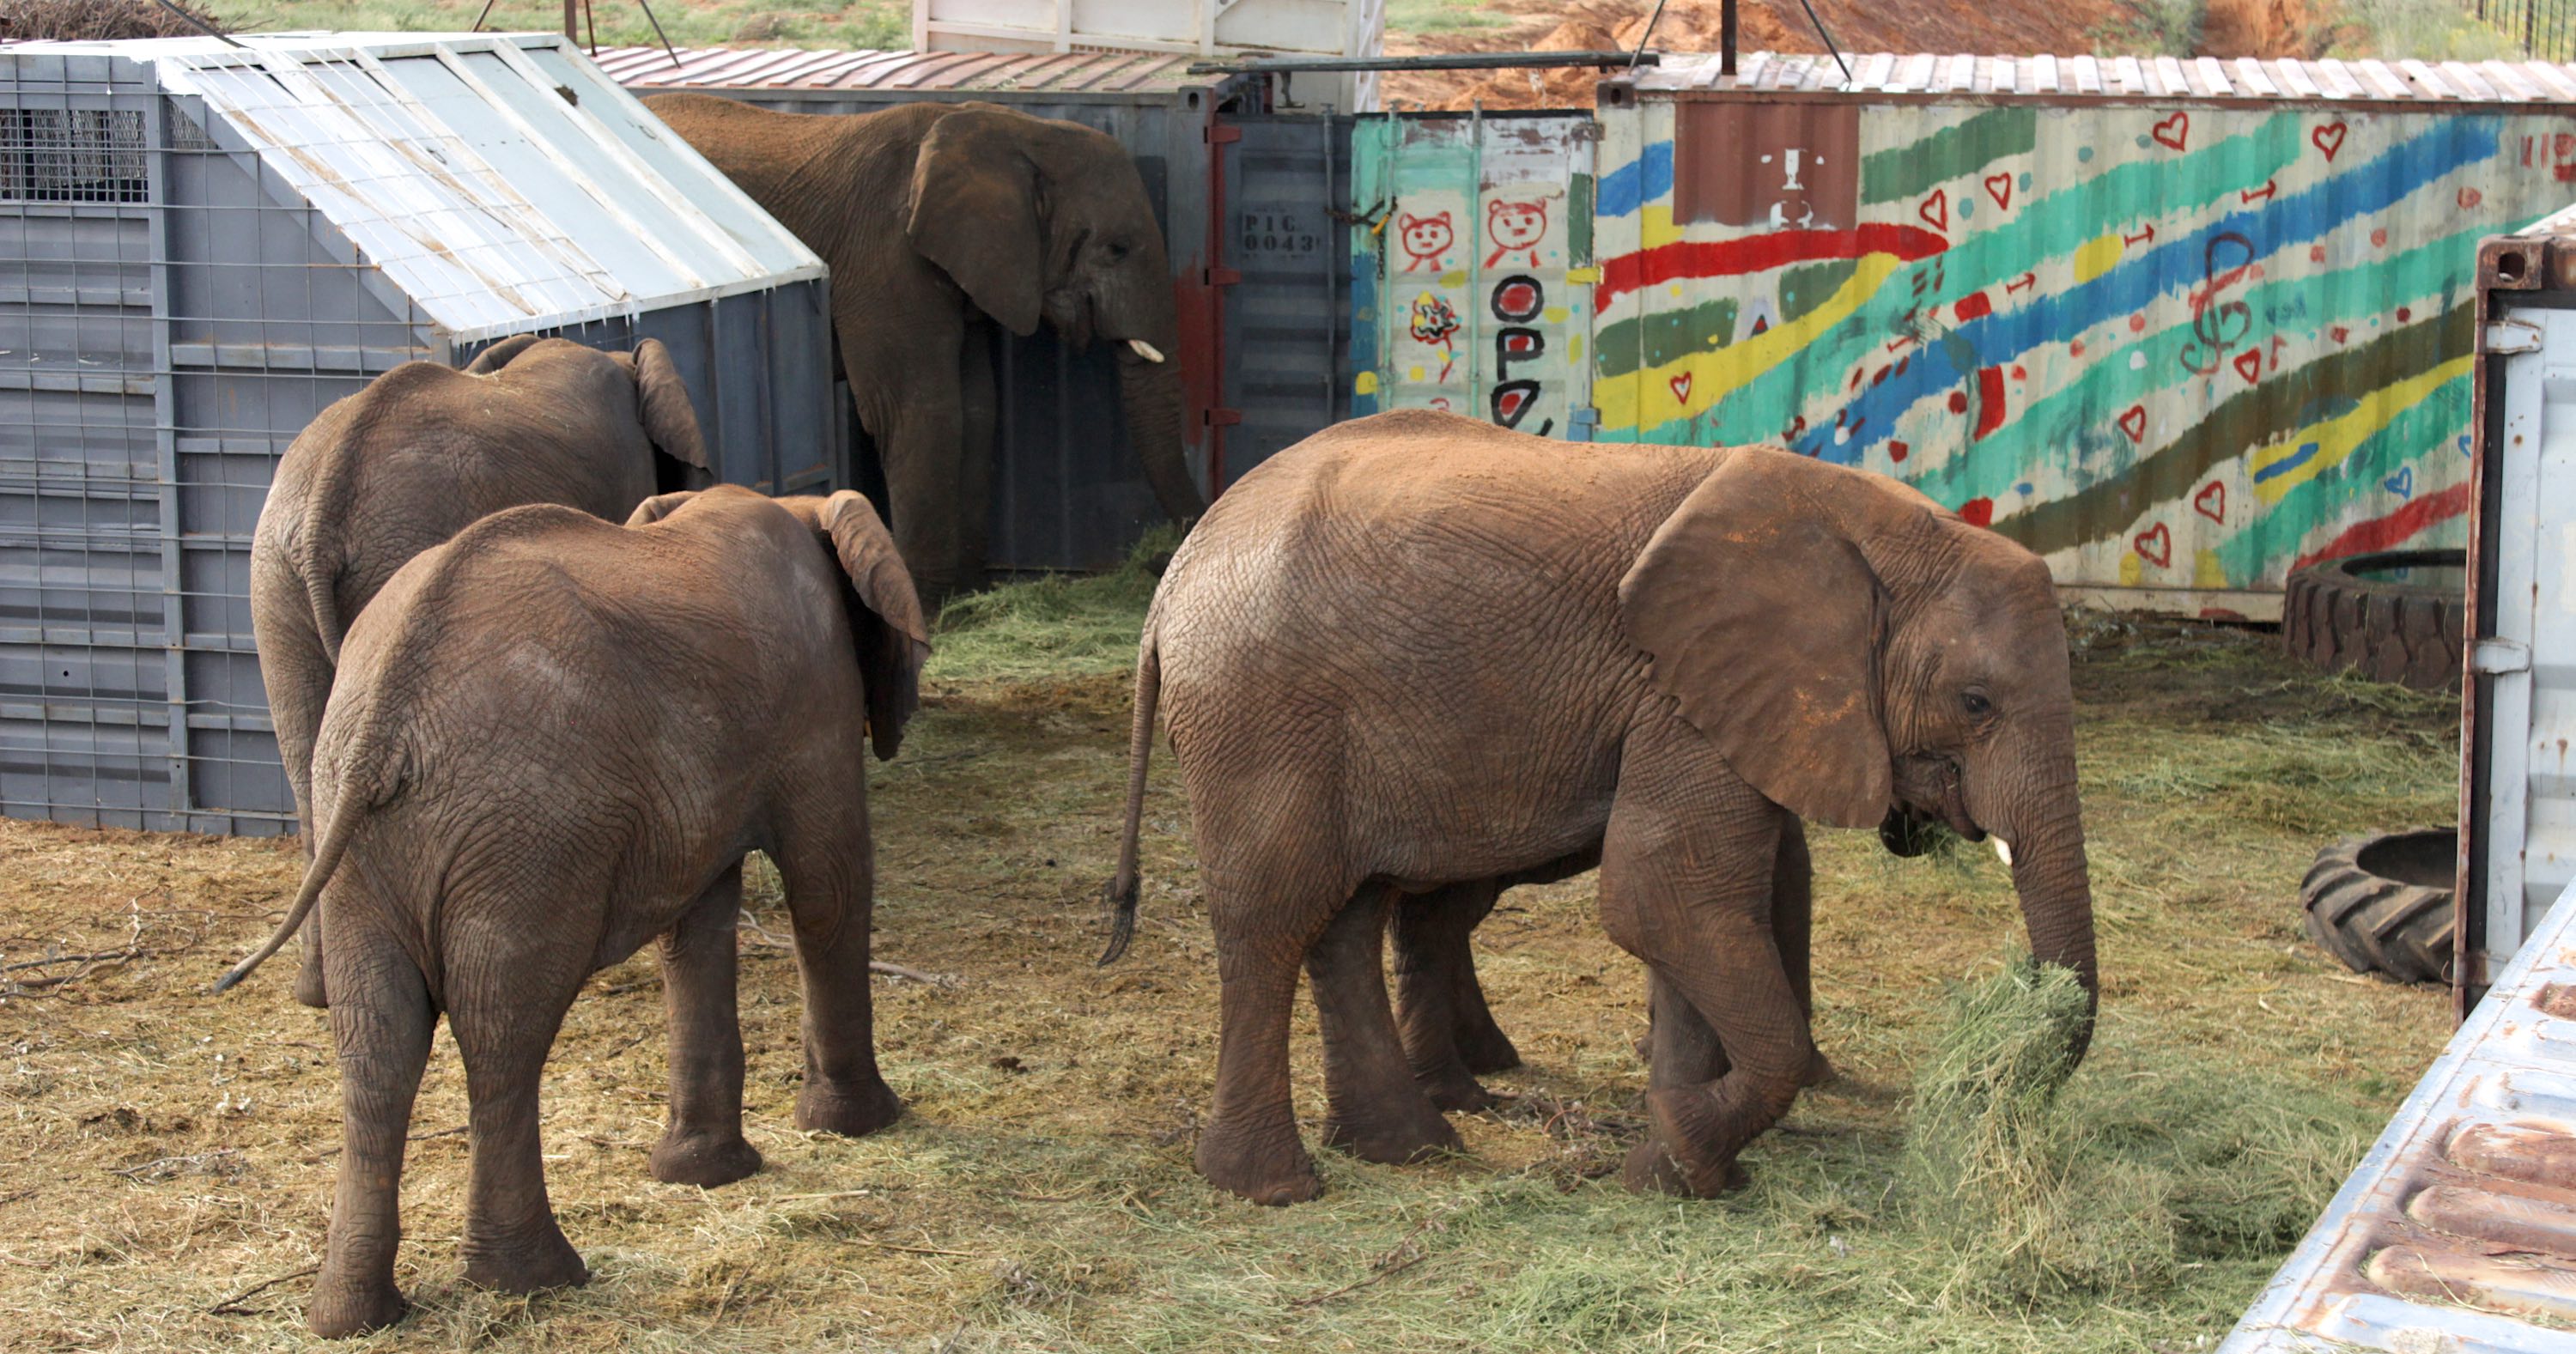 Four elephants feeding in amongst various shipping containers.